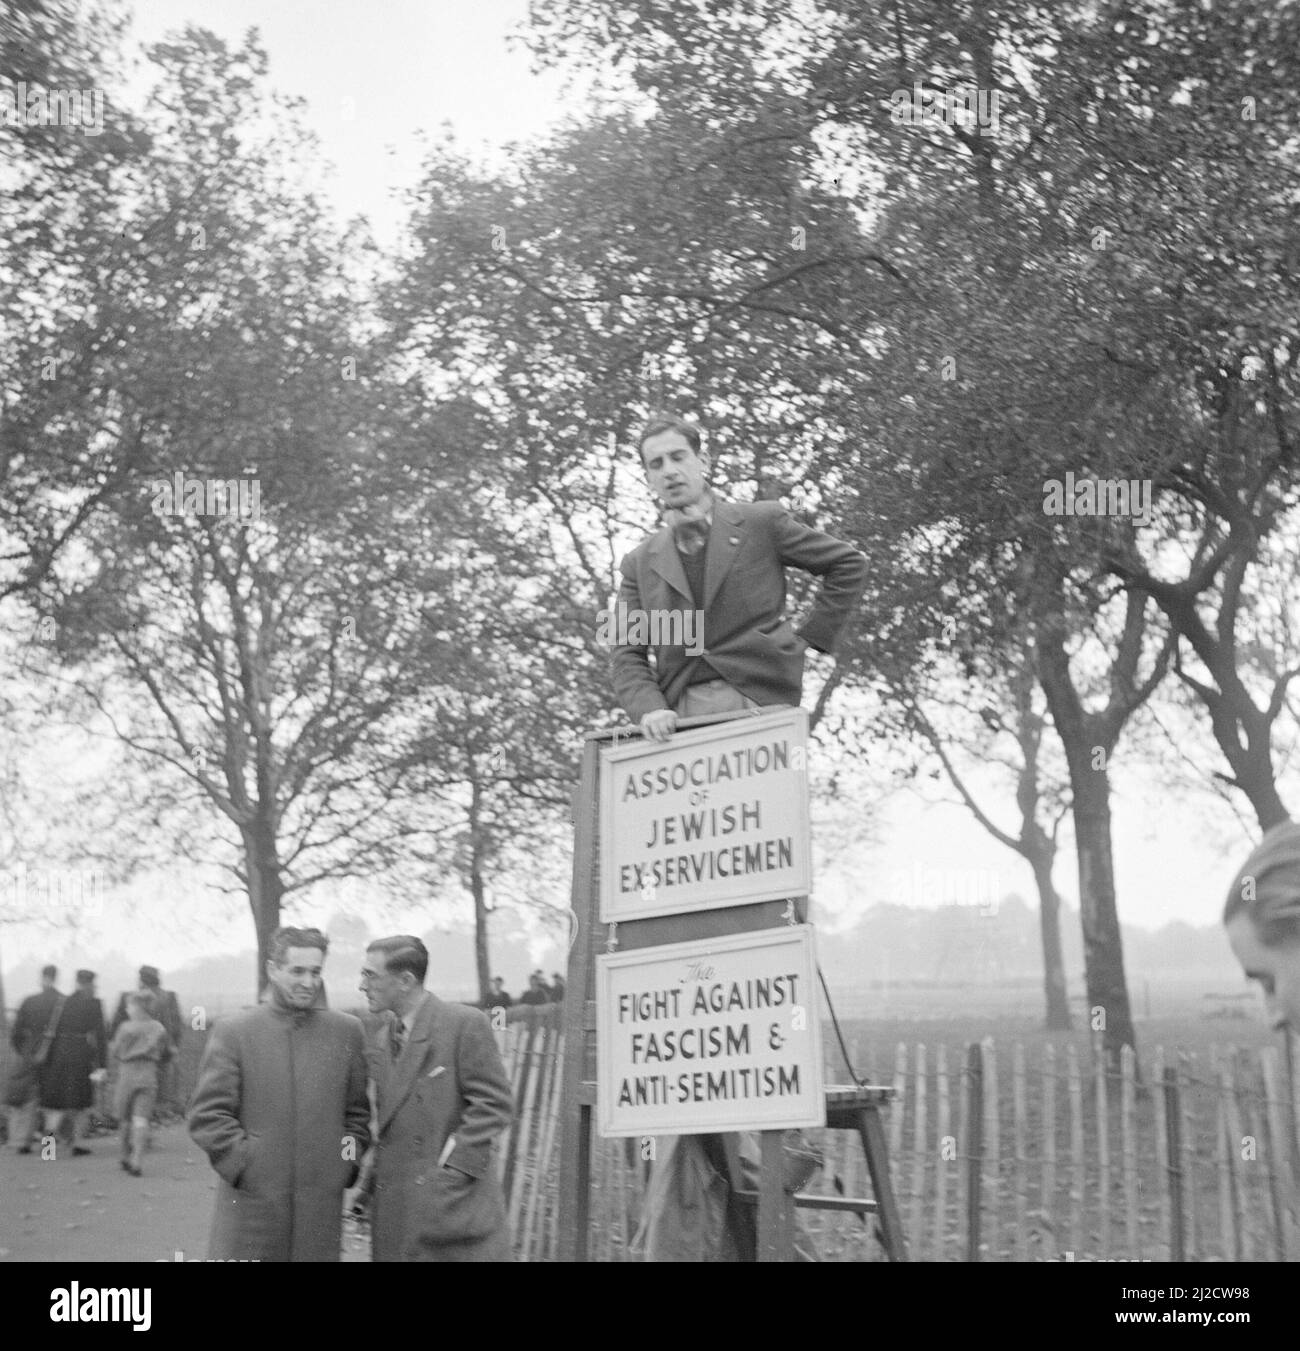 A speaker at Speakers' Corner in Hyde Park. The signs read: Association of Jewish Ex-servicemen Fight against Fascism & Anti-Semitism  ca: 1947 Stock Photo